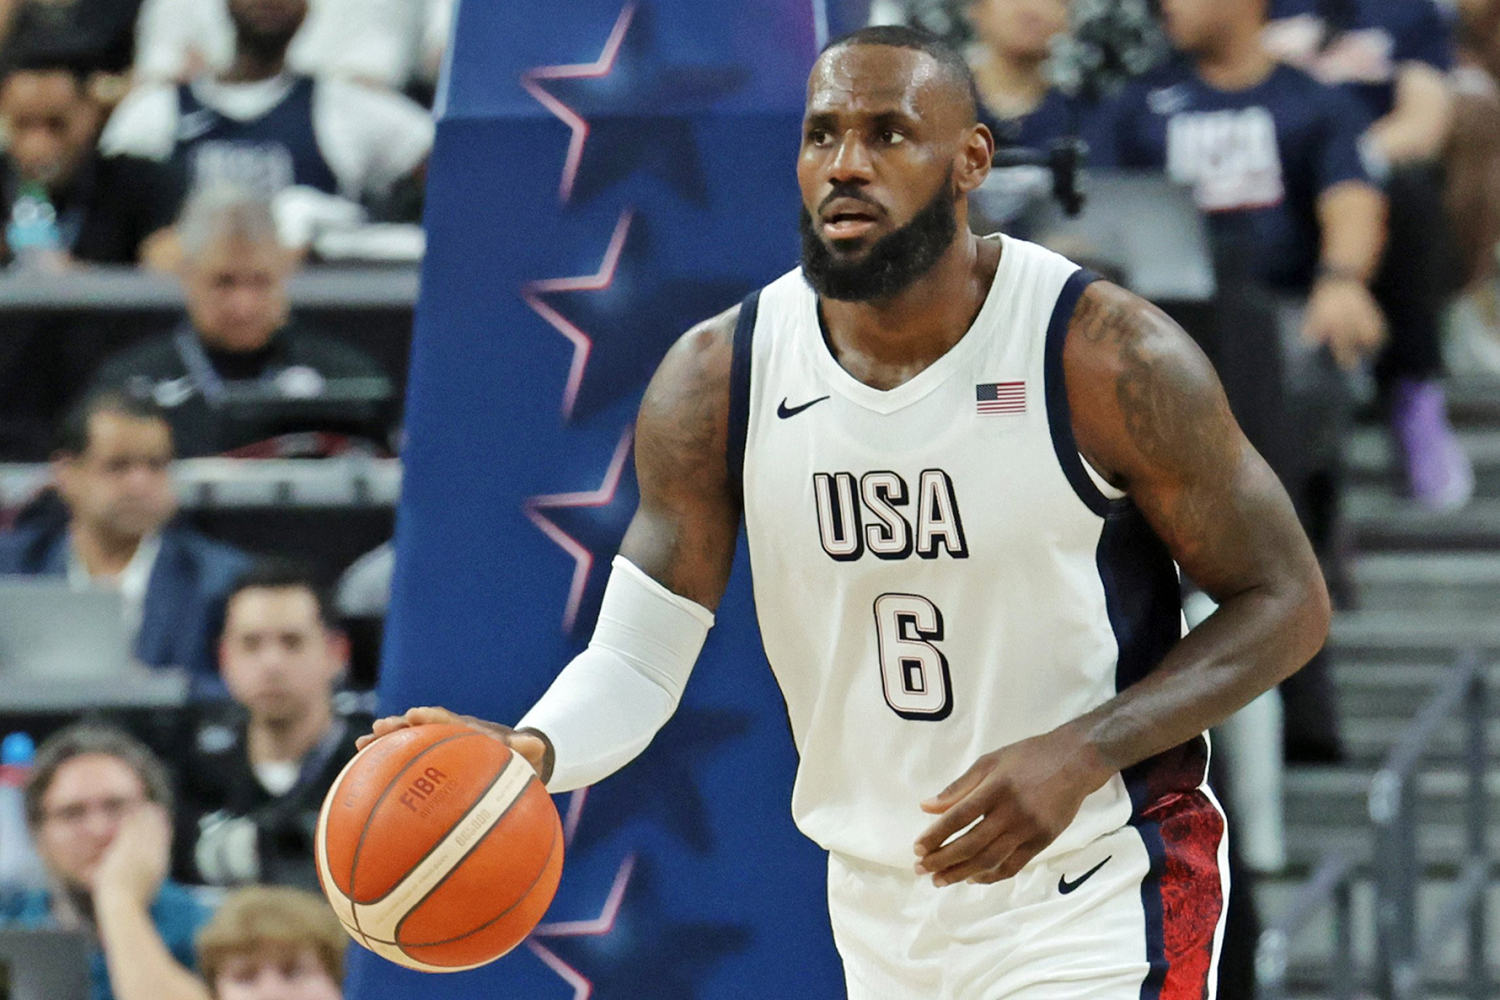 LeBron James reveals the other Olympic sport he’d want to compete in